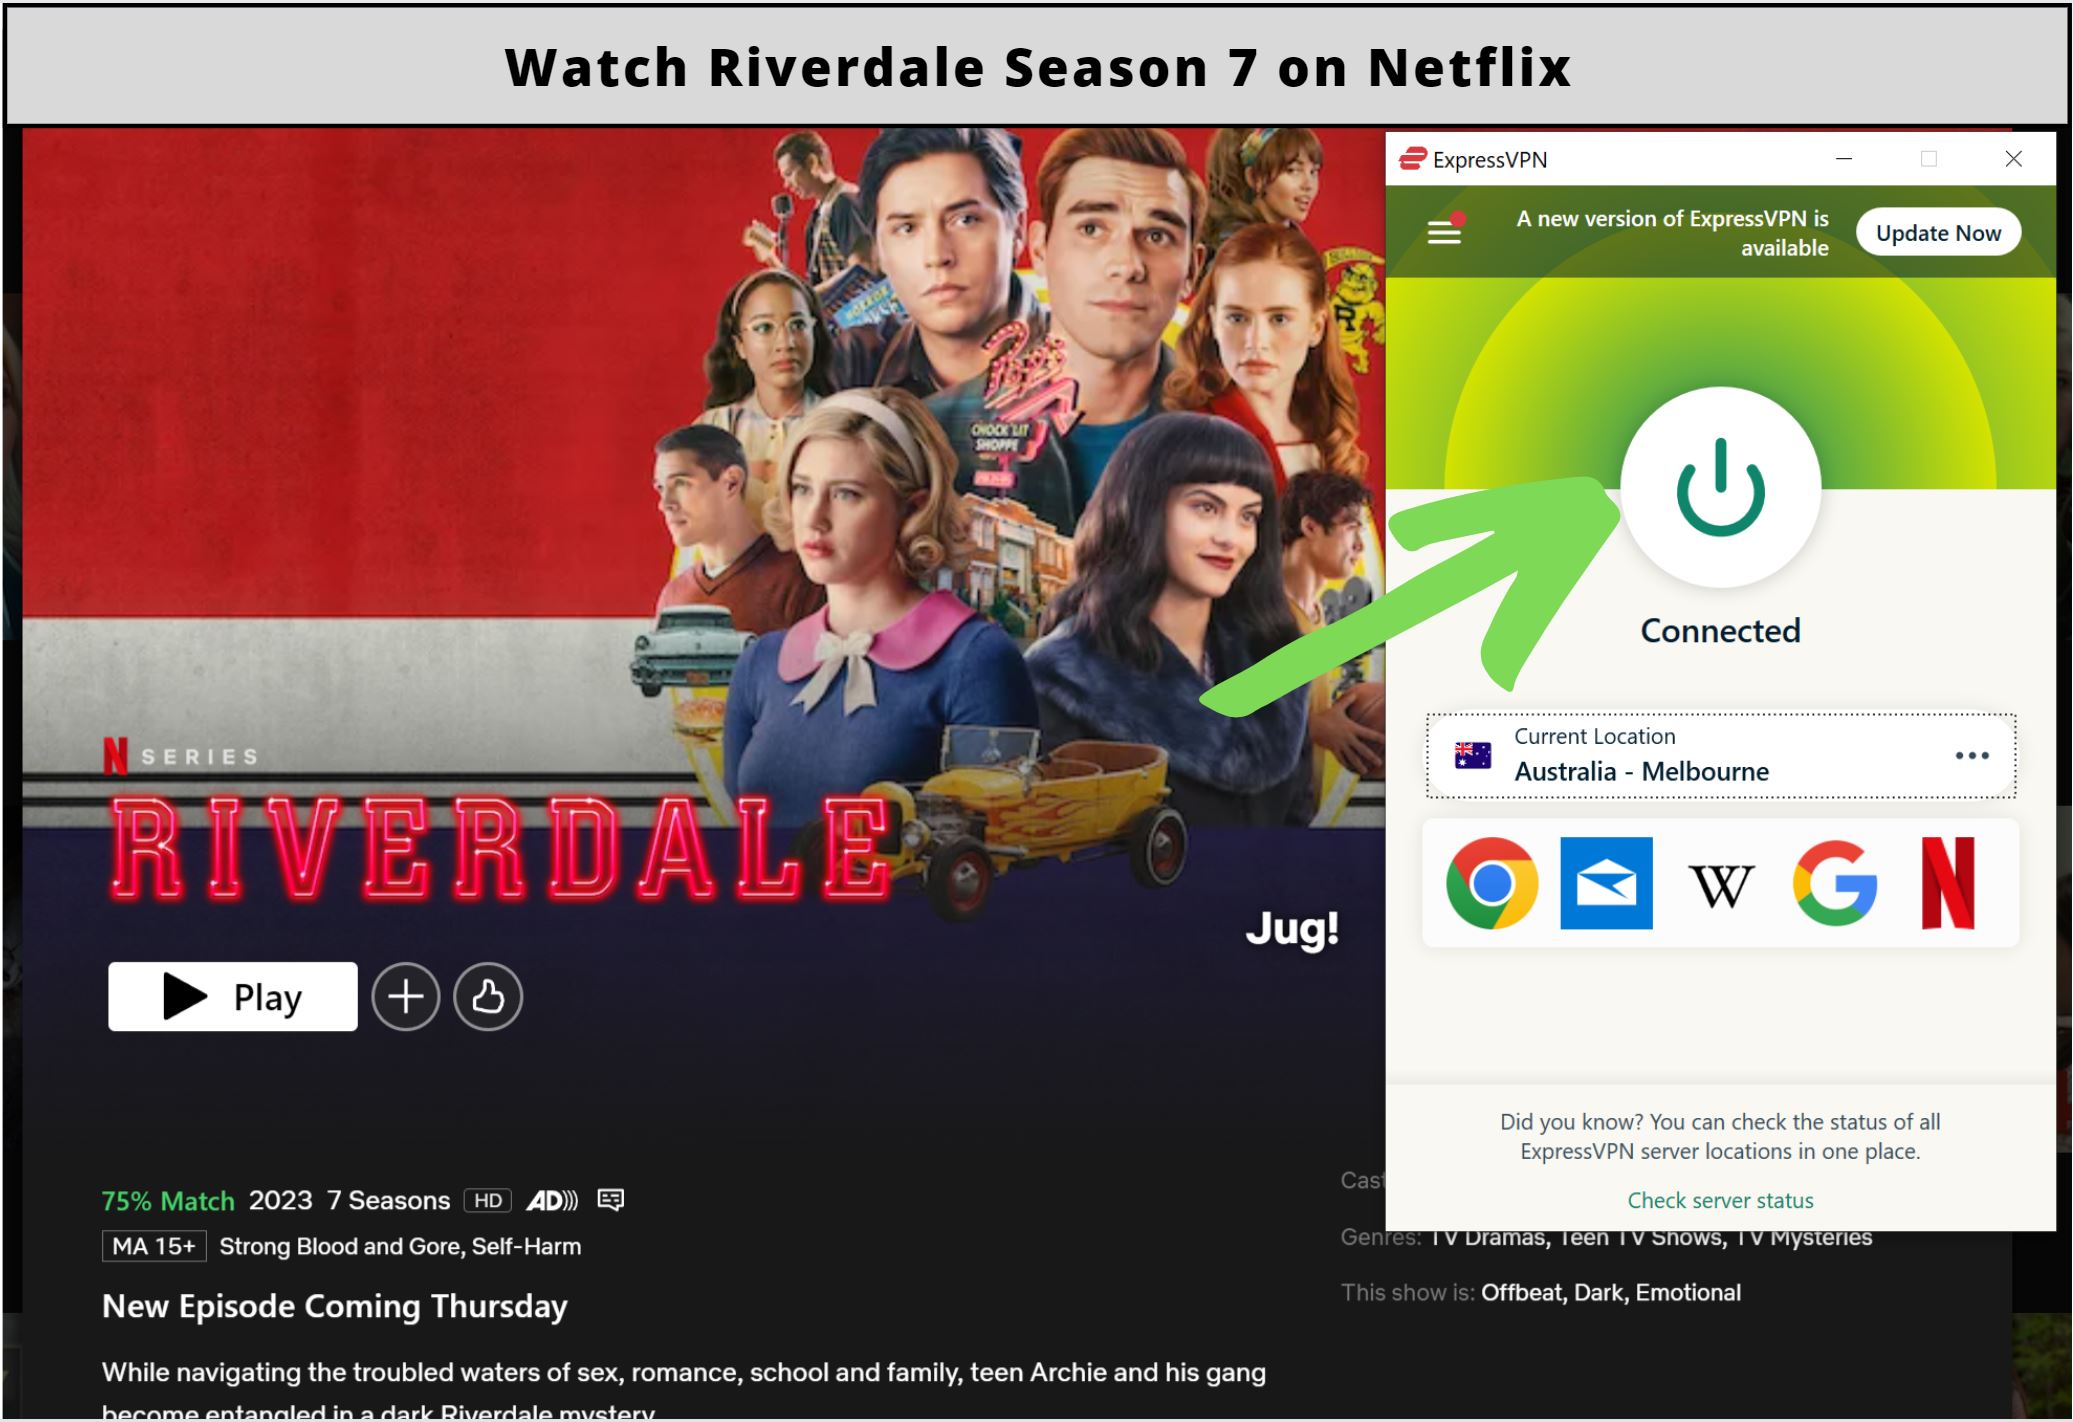 watch Riverdale Season 7 on Netflix in the United States?